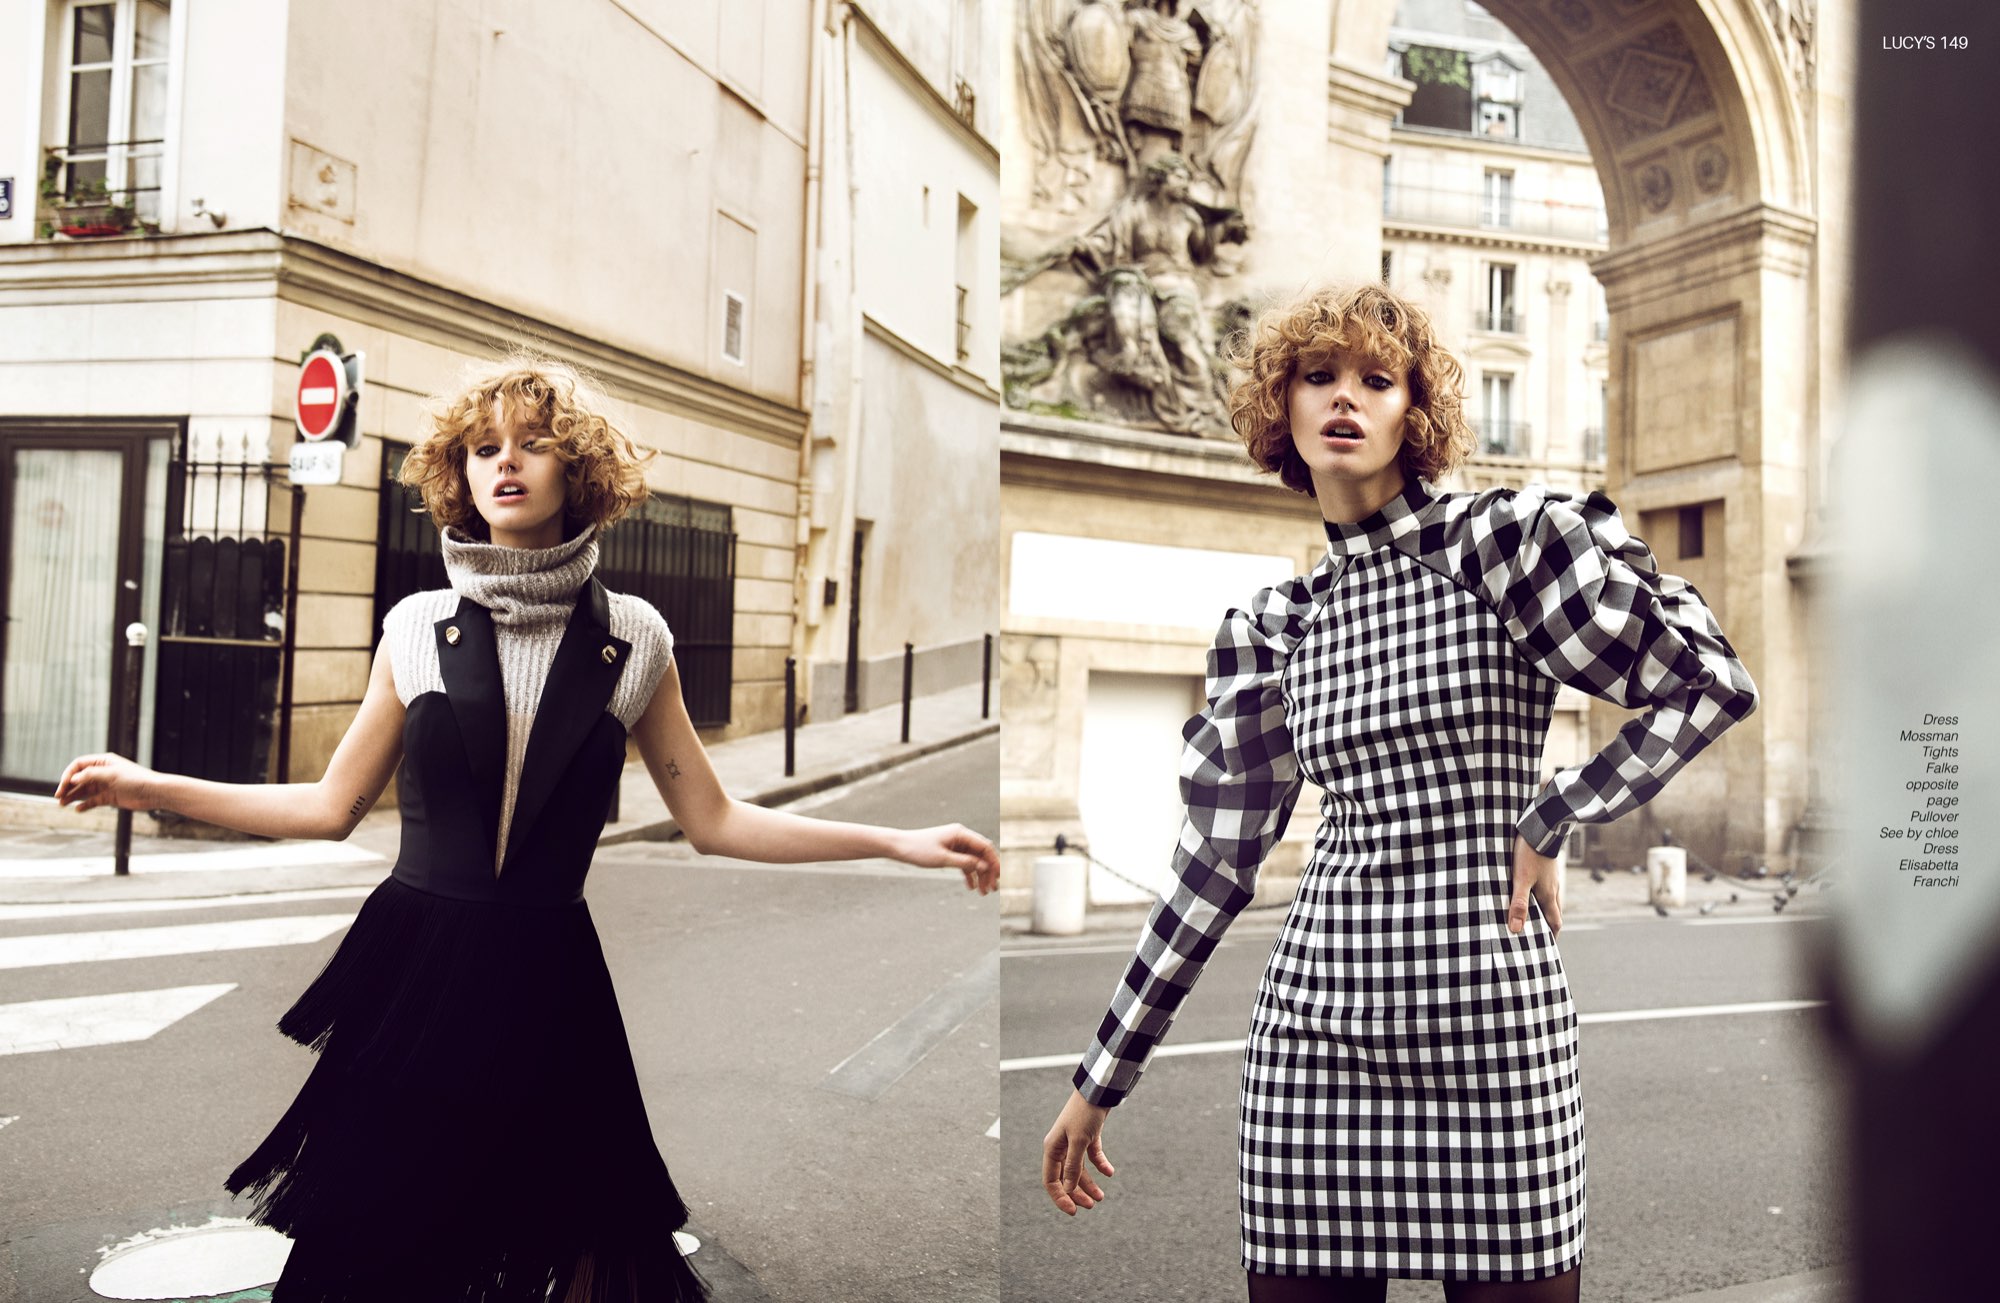 New editorial in Paris of Fabienne & Julia for Lucy’s Magazine